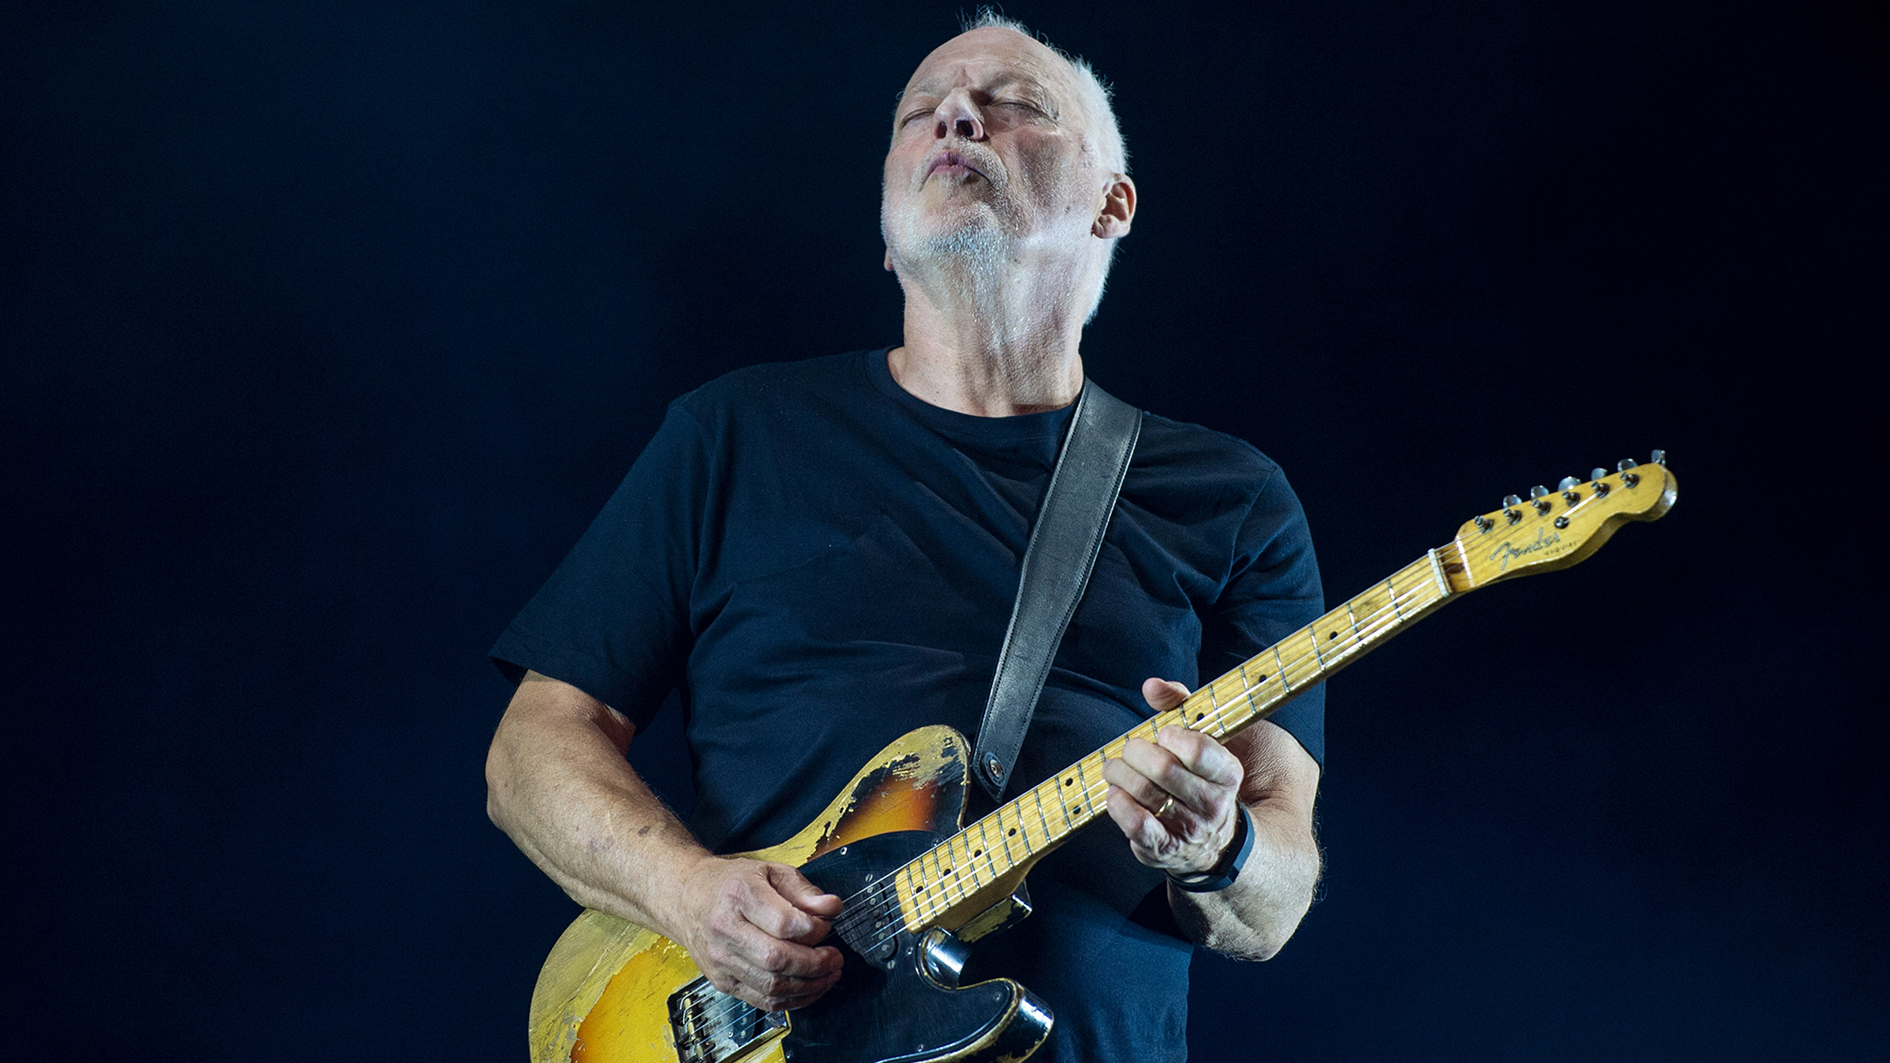 The secrets behind David Gilmour's tone on Pink Floyd's